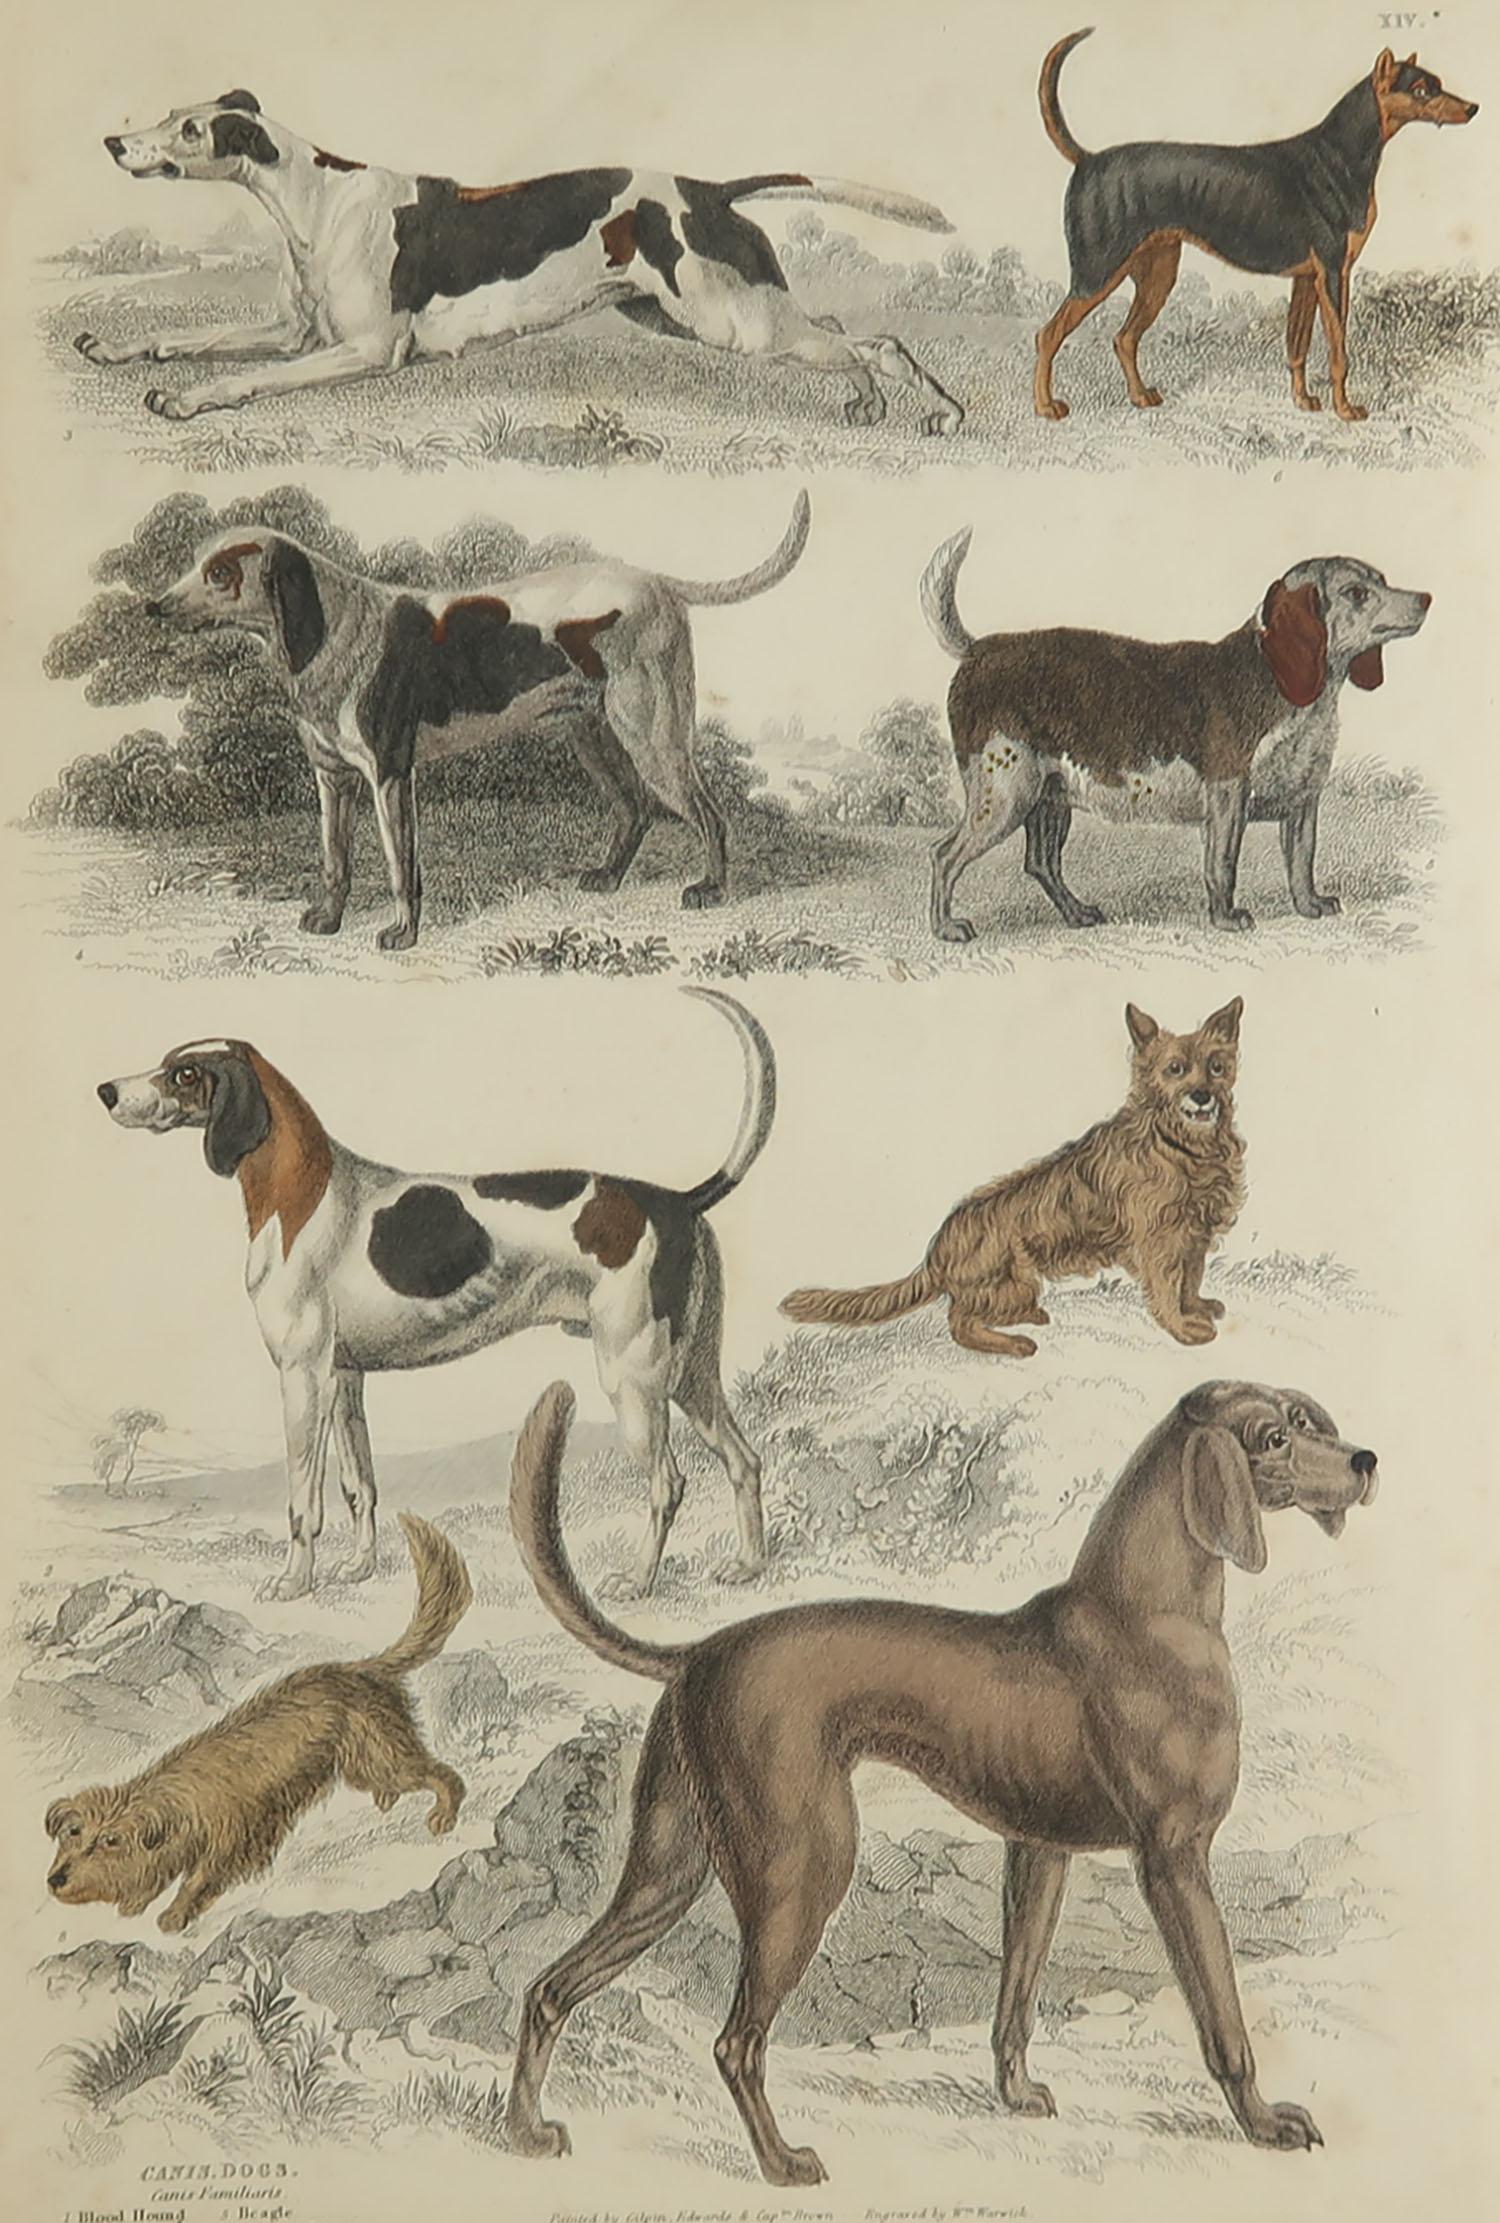 Great image of sporting dogs

Unframed. It gives you the option of perhaps making a set up using your own choice of frames.

Lithograph after Cpt. Brown, Gilpin and Edwards with original hand color.

Published circa 1835

Free